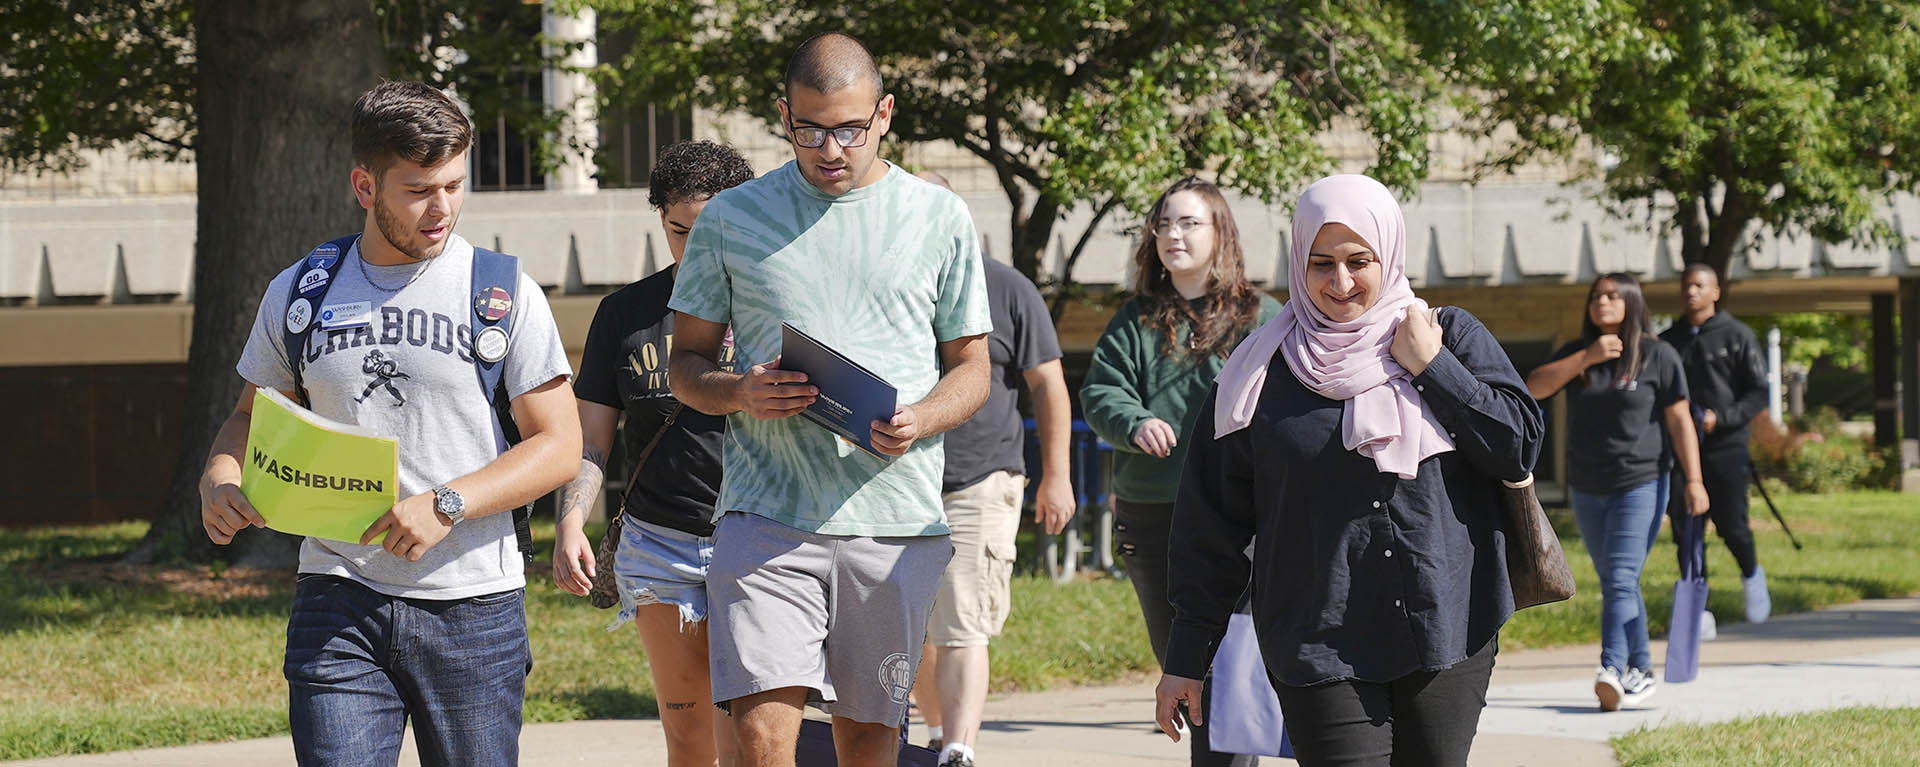 Students walk to their next session during orientation.